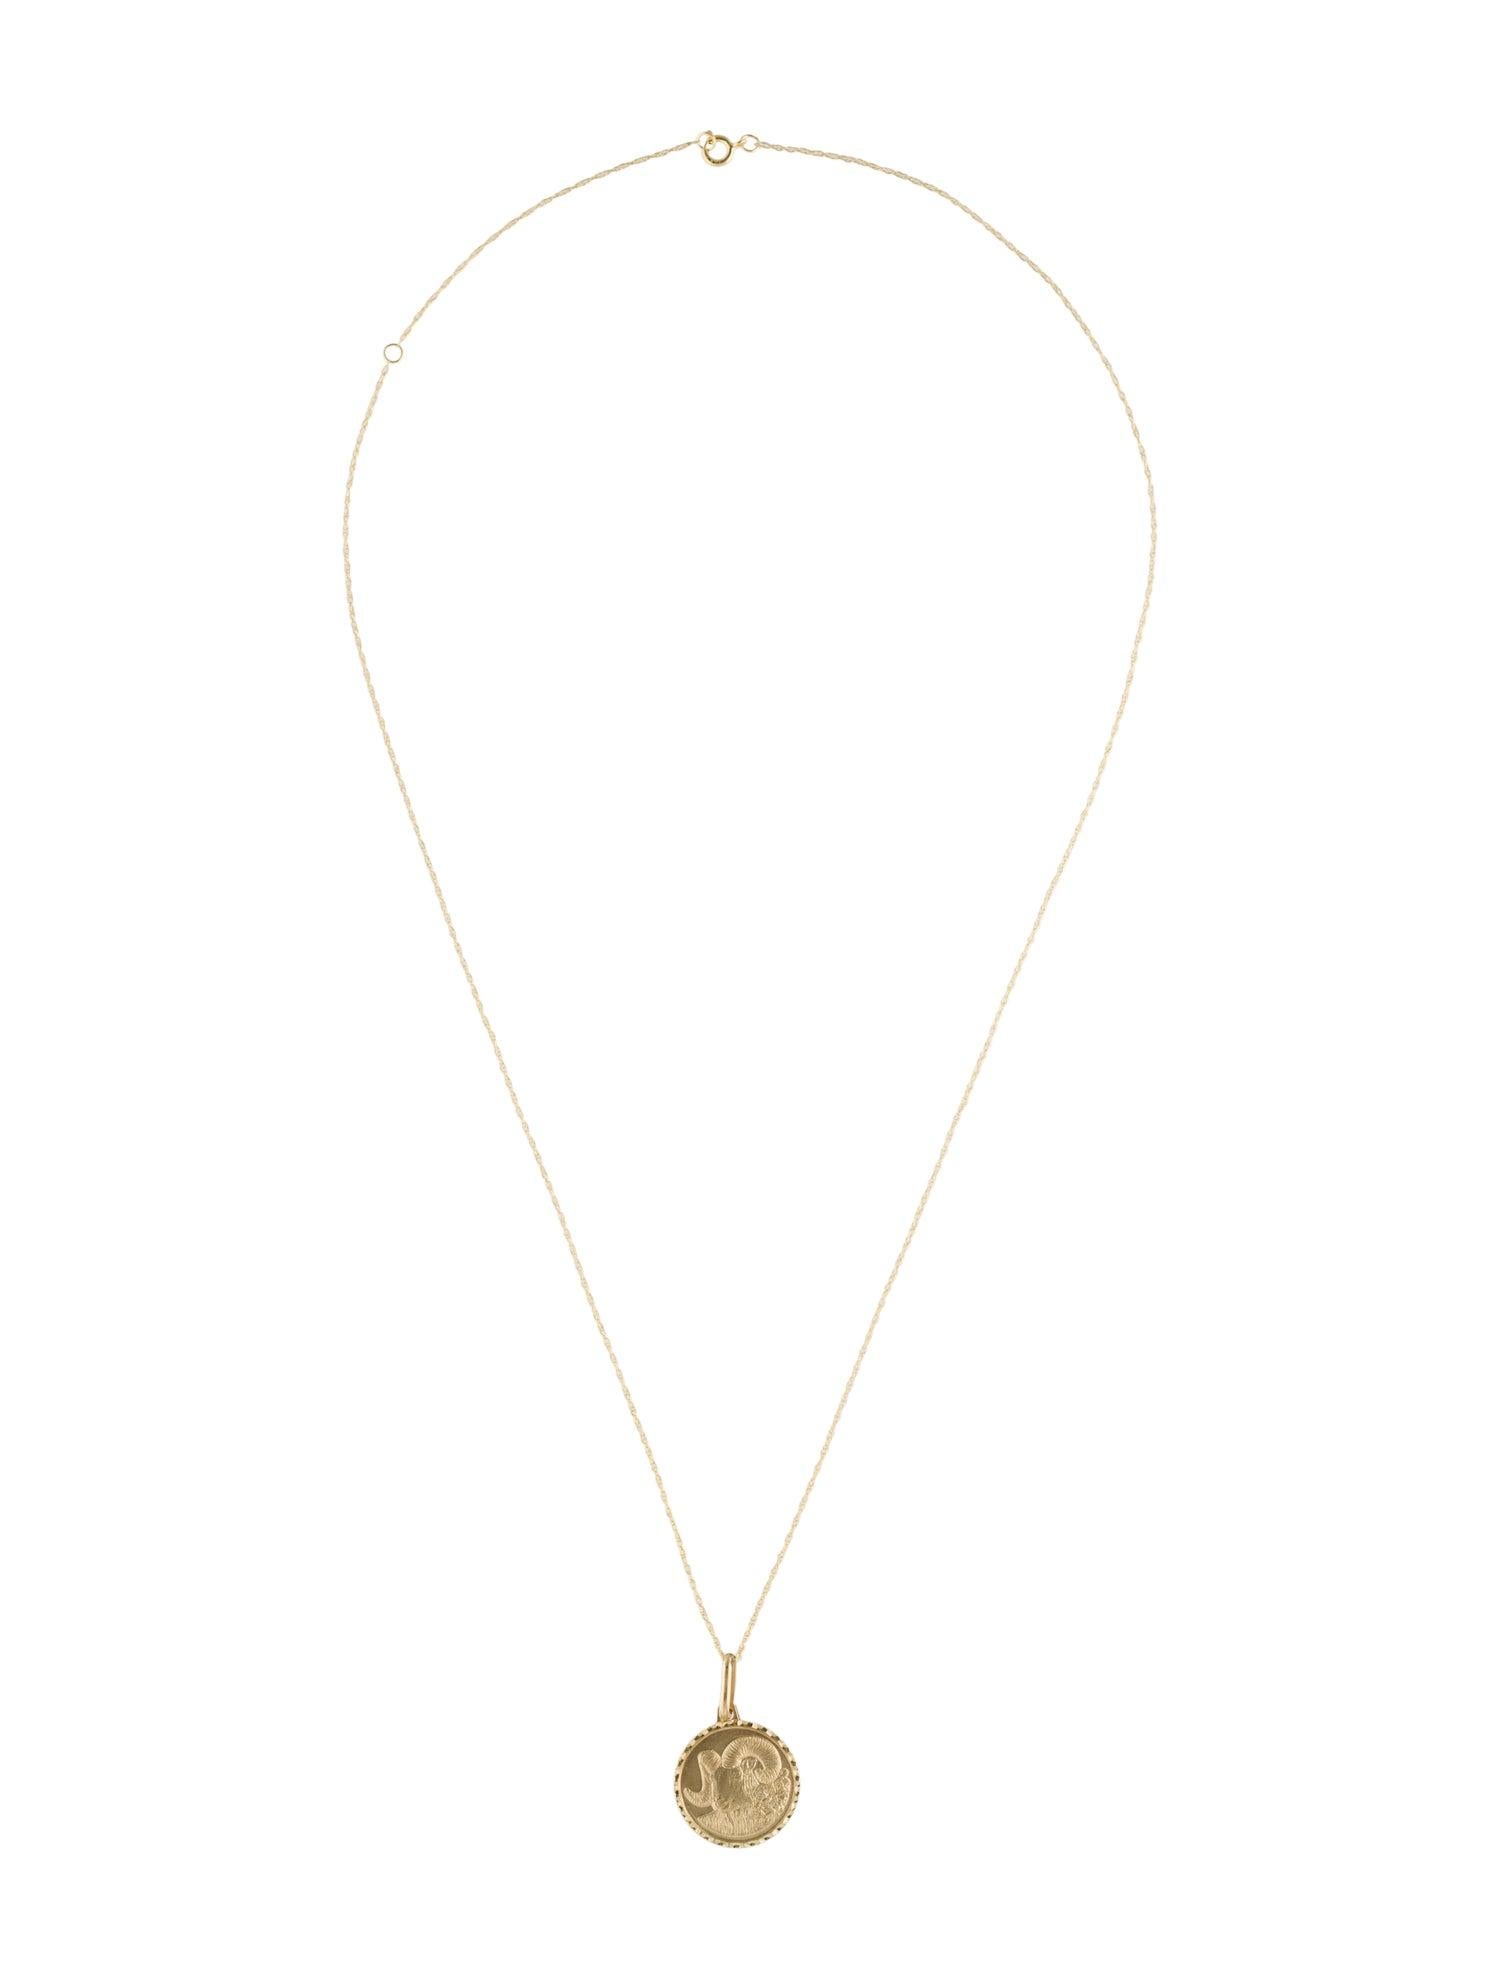 Contemporary 14k Yellow Gold Zodiac Pendant Necklace, Aries For Sale